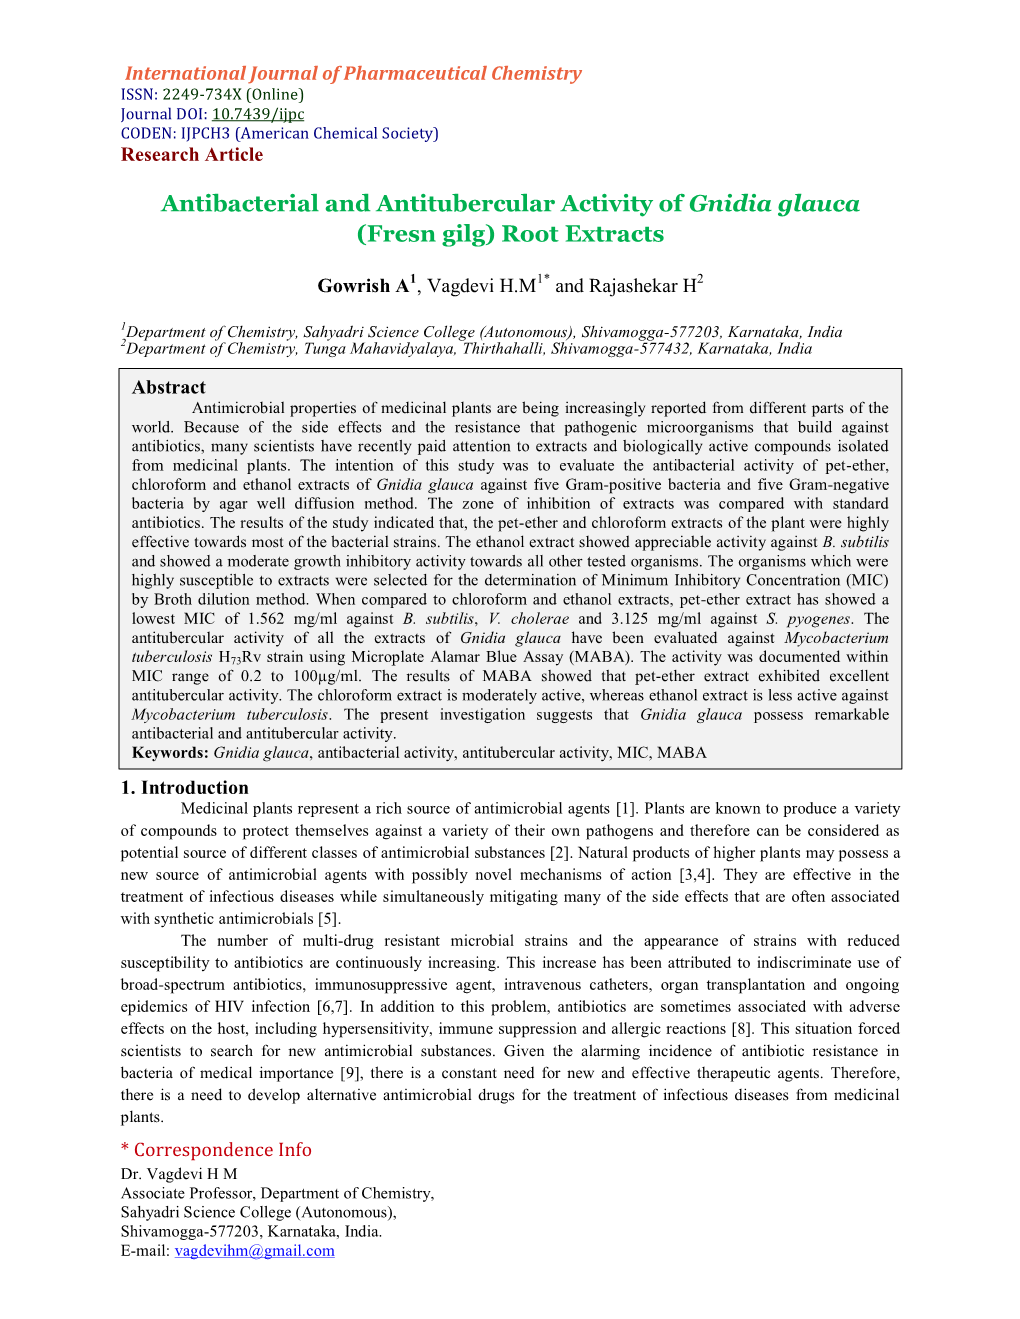 Antibacterial and Antitubercular Activity of Gnidia Glauca (Fresn Gilg) Root Extracts